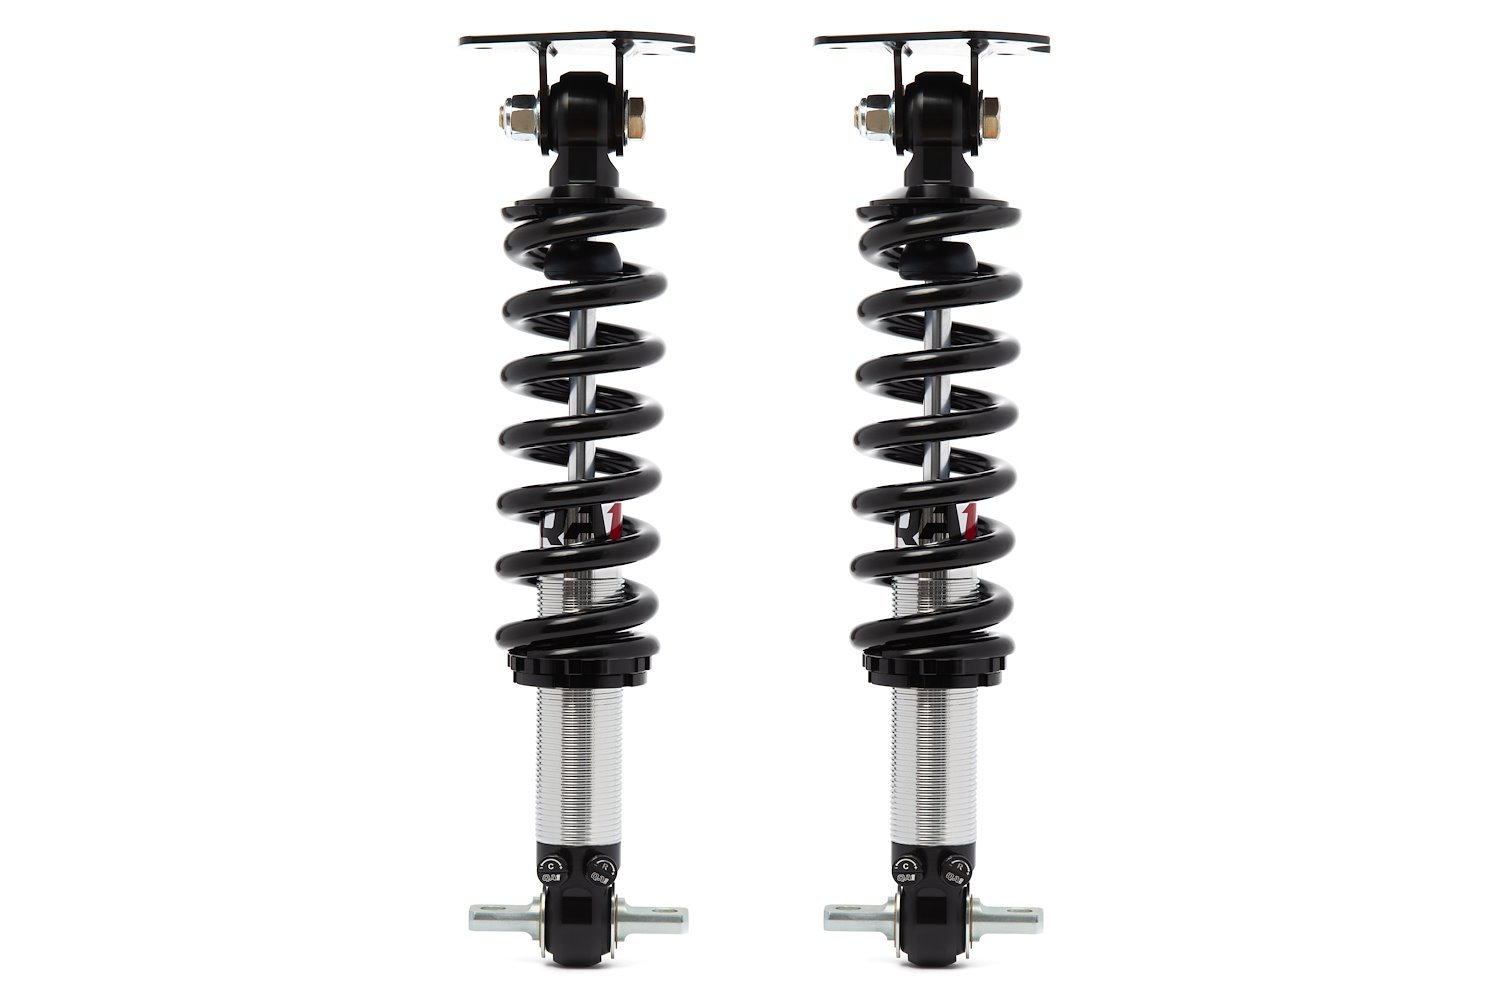 GD518-10950 Front Pro Coil Kit w/Double-Adjustable Shocks for 2007-2018 Chevy Silverado, GMC Sierra 4WD [950 lb. Springs]